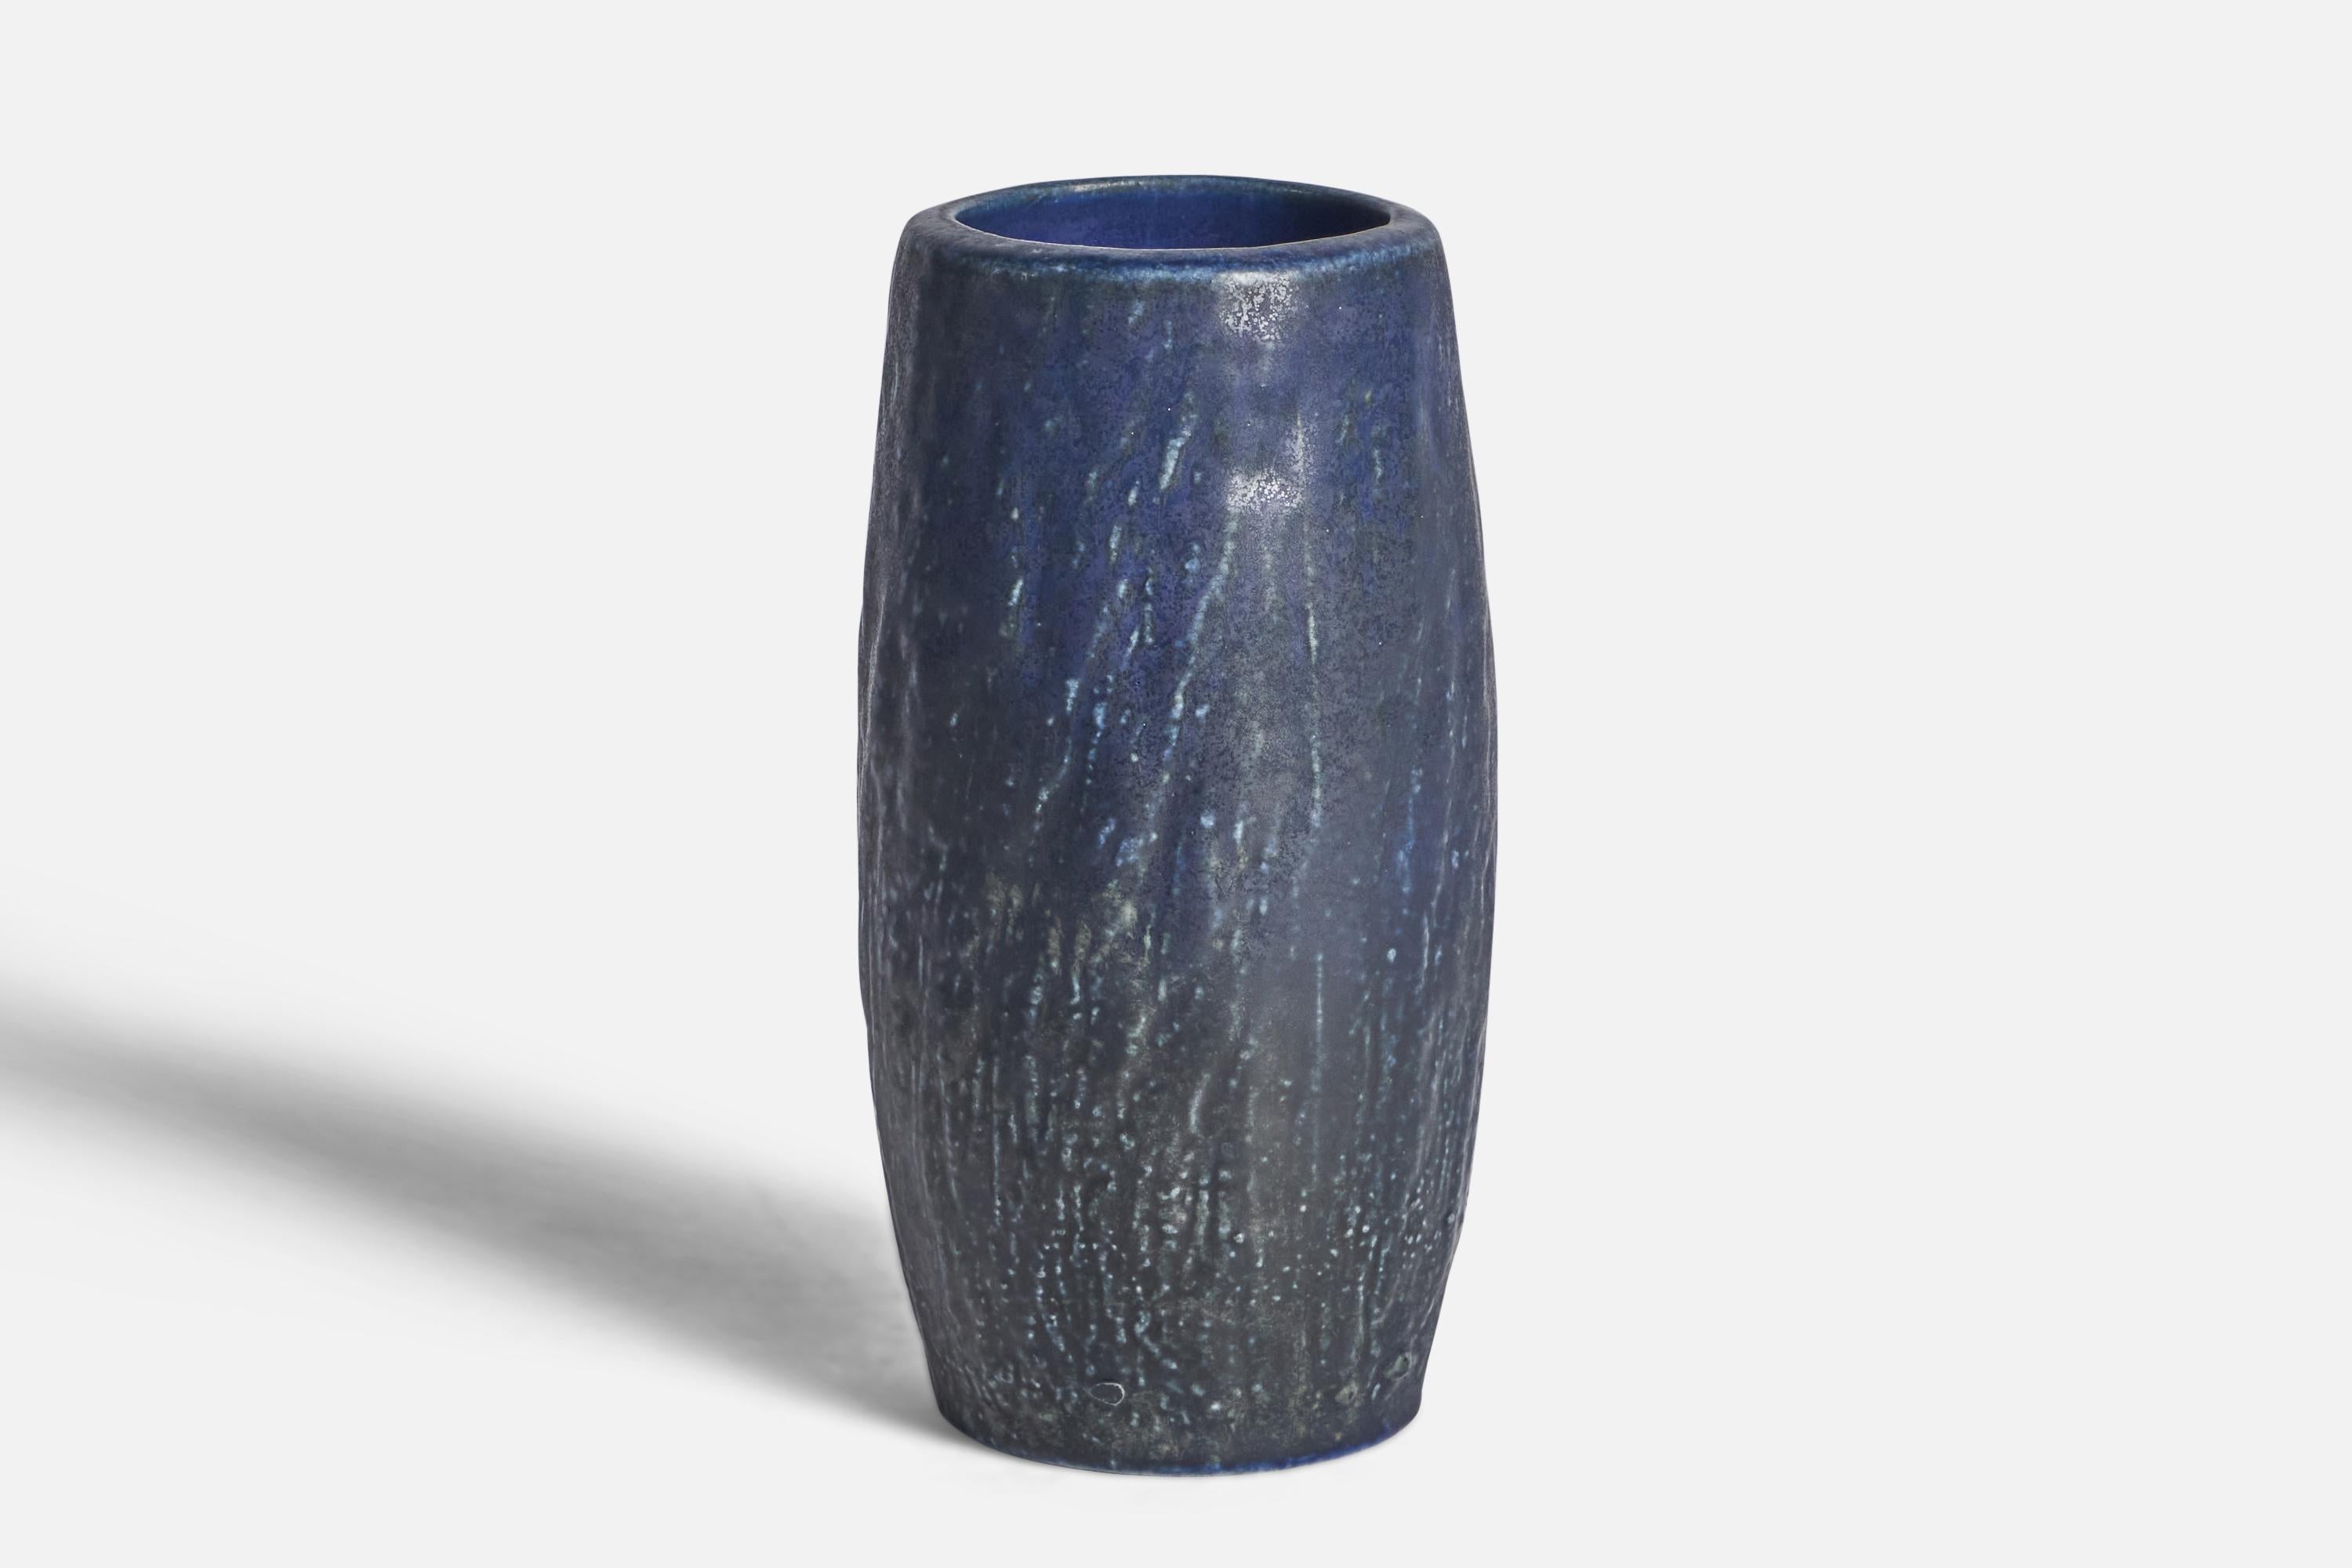 A blue-glazed stoneware vase designed by Gunnar Nylund and produced by Rörstrand, Sweden, 1940s.